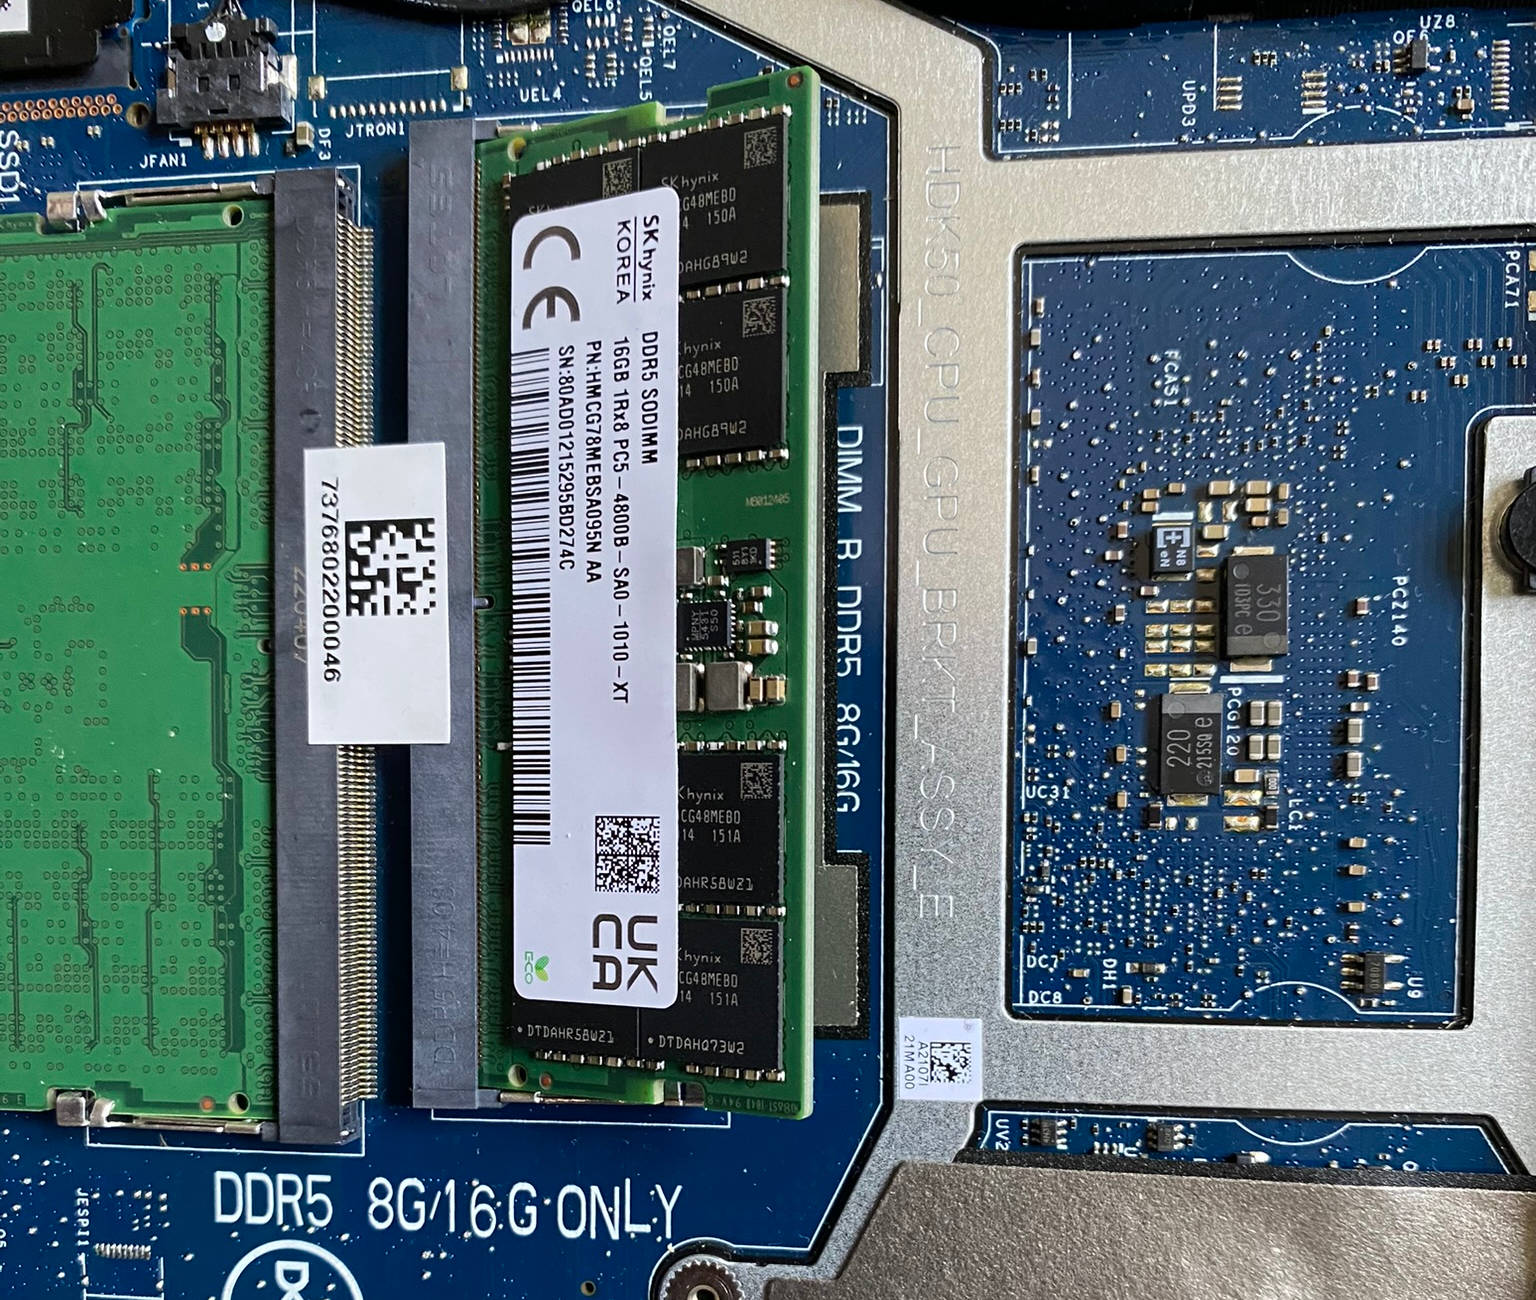 The G15 motherboard, with a large "DDR5 8G/16G Only" label, and a smaller "DIMM B DDR5 8G/16G" label next to a SODIMM slot